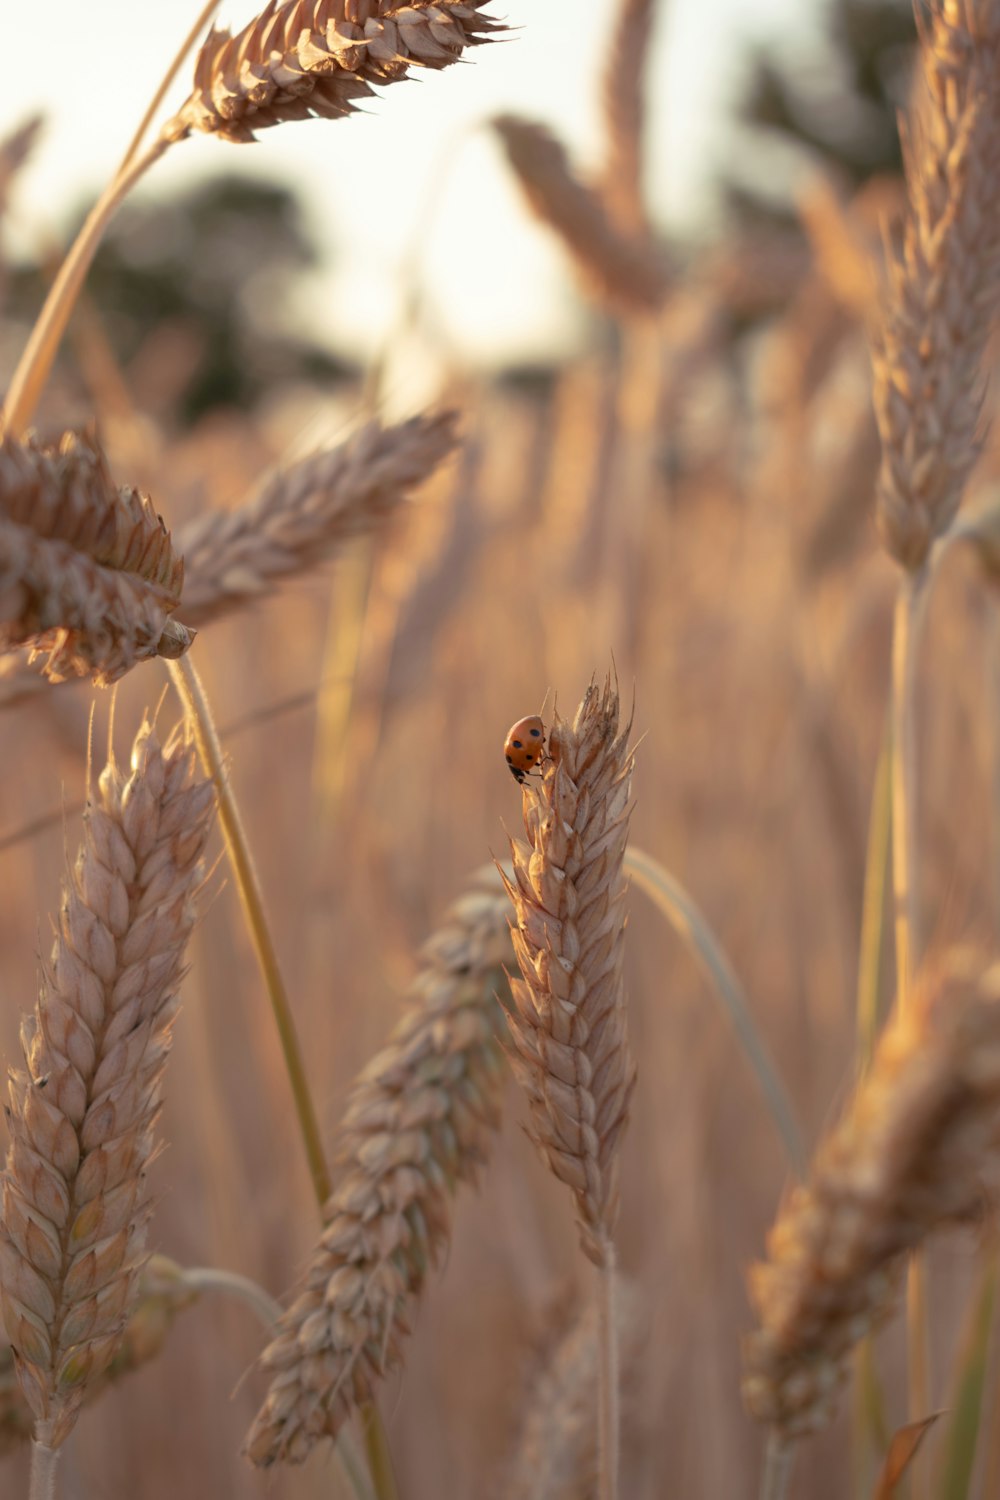 a close up of a bunch of wheat in a field